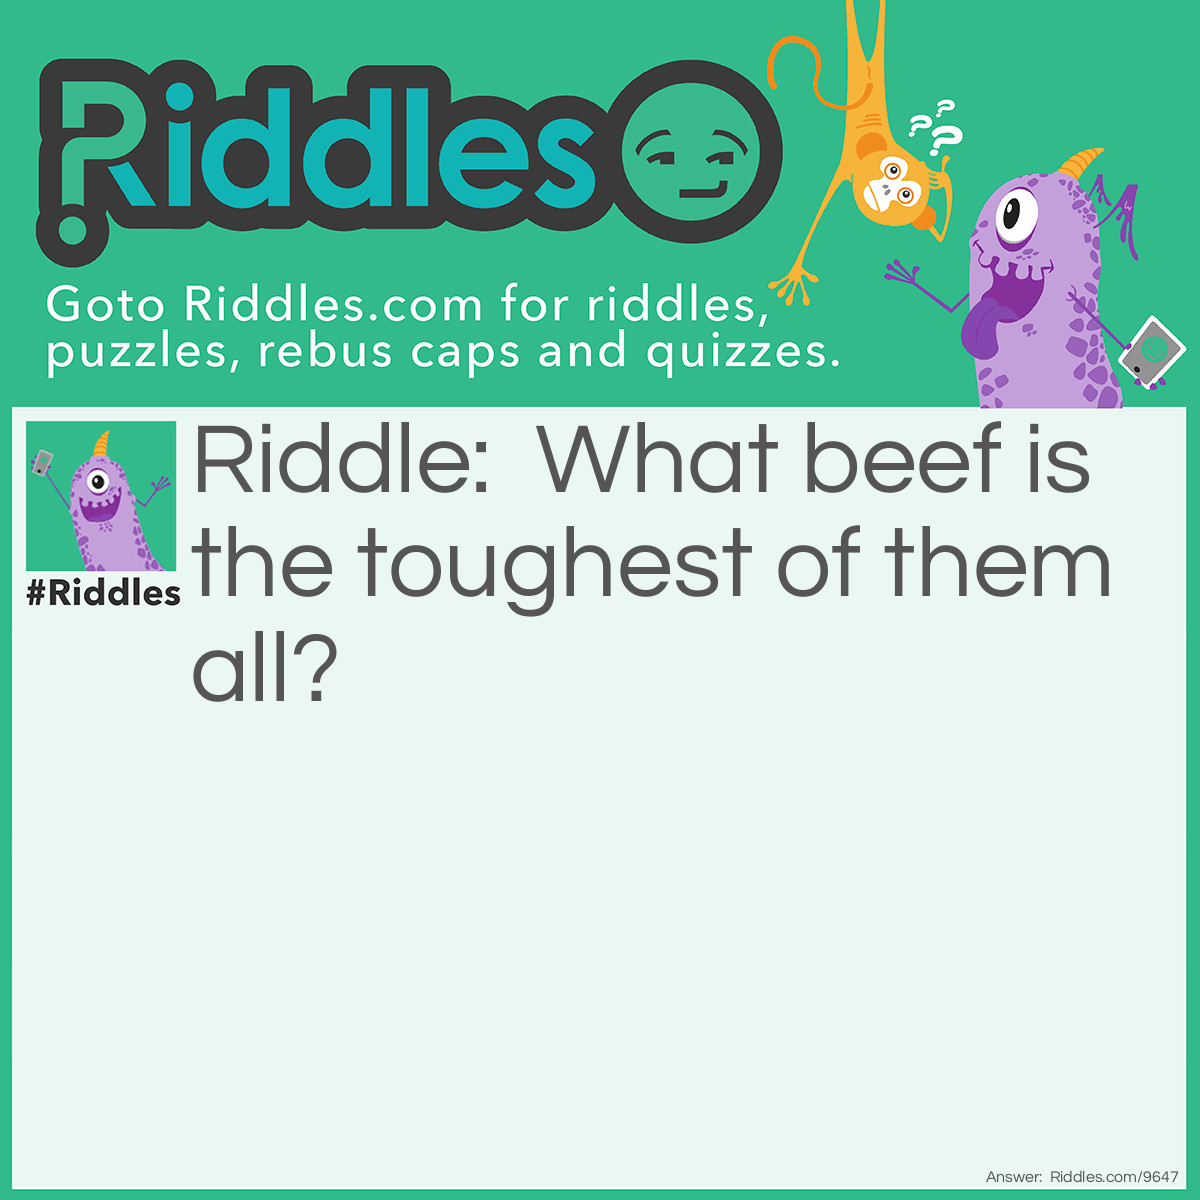 Riddle: What beef is the toughest of them all? Answer: Mongolian beef.